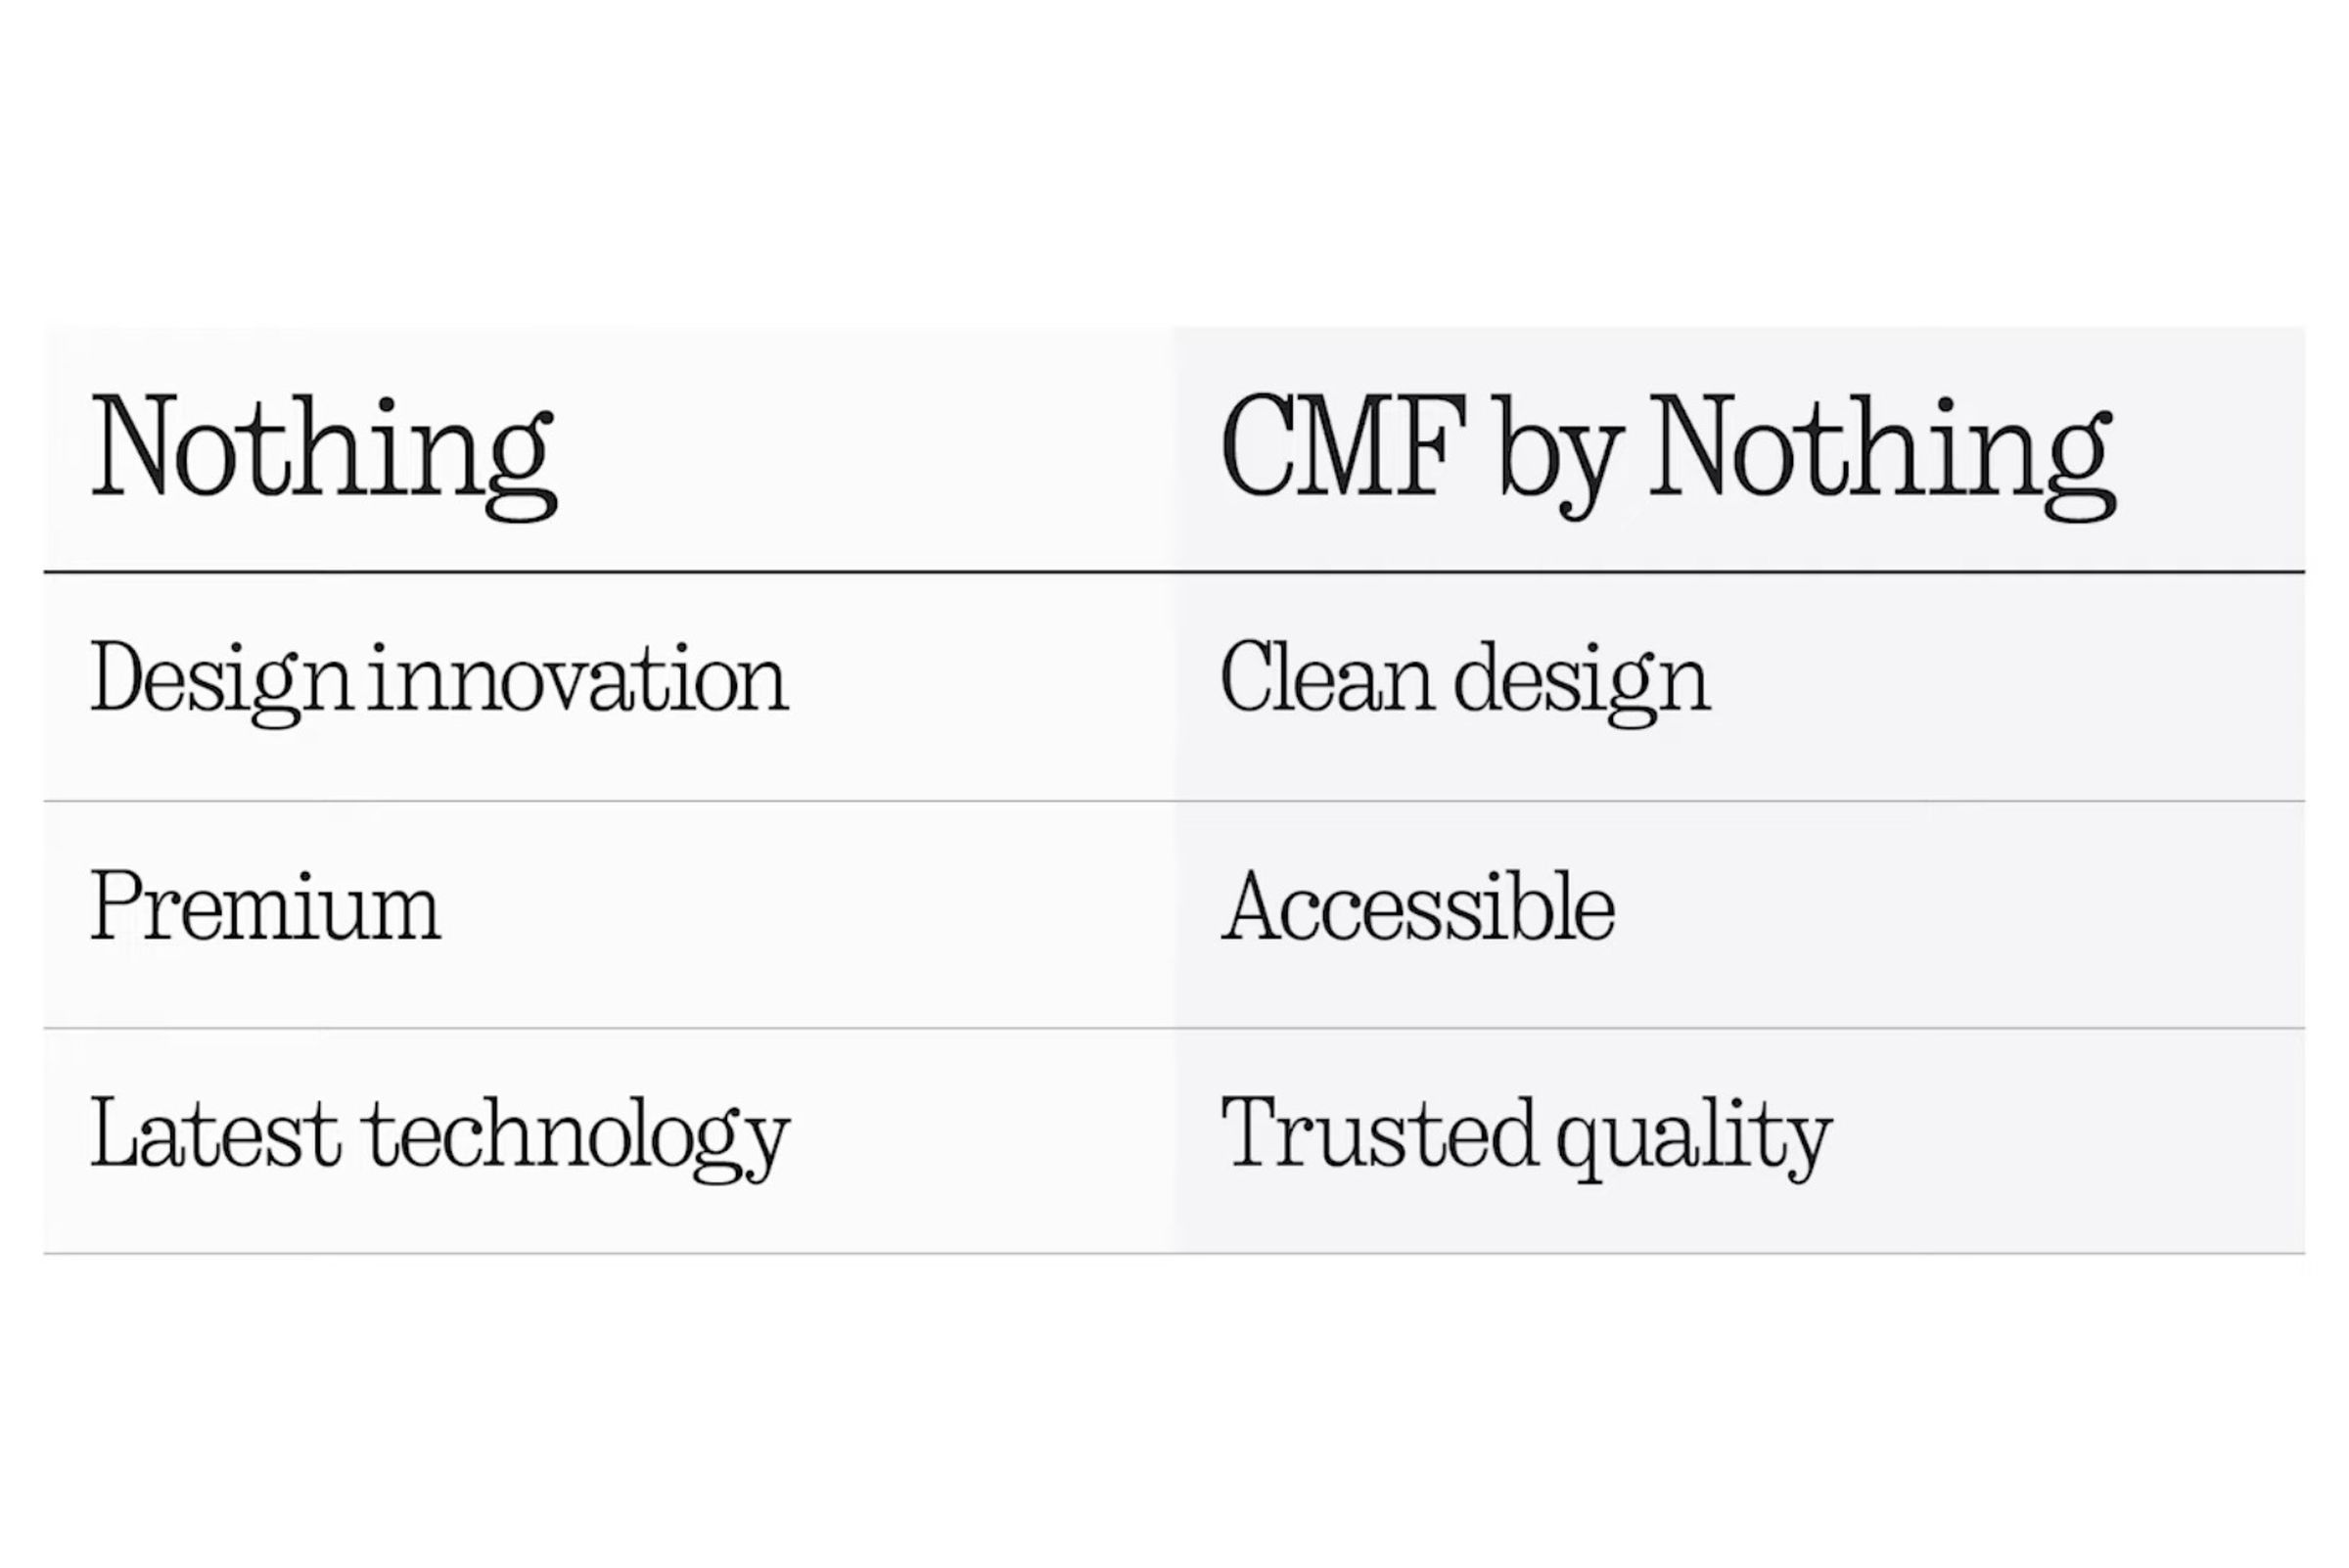 A table comparing Nothing and CMF by Nothing.